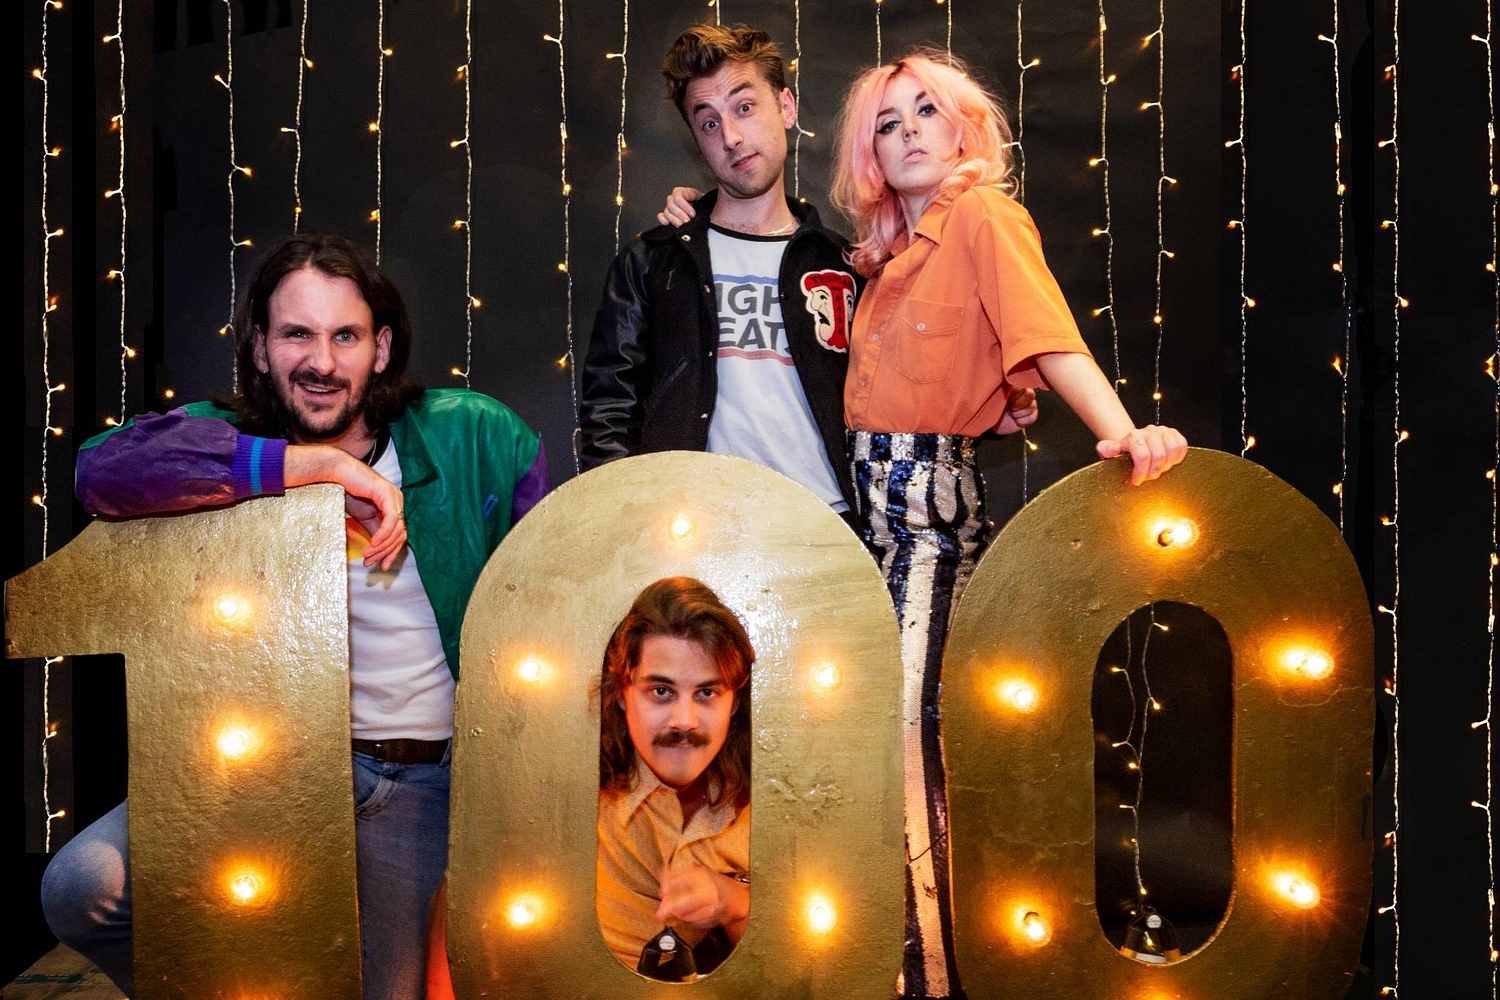 Live & Kicking: Looking back on DIY’s 100th celebrations